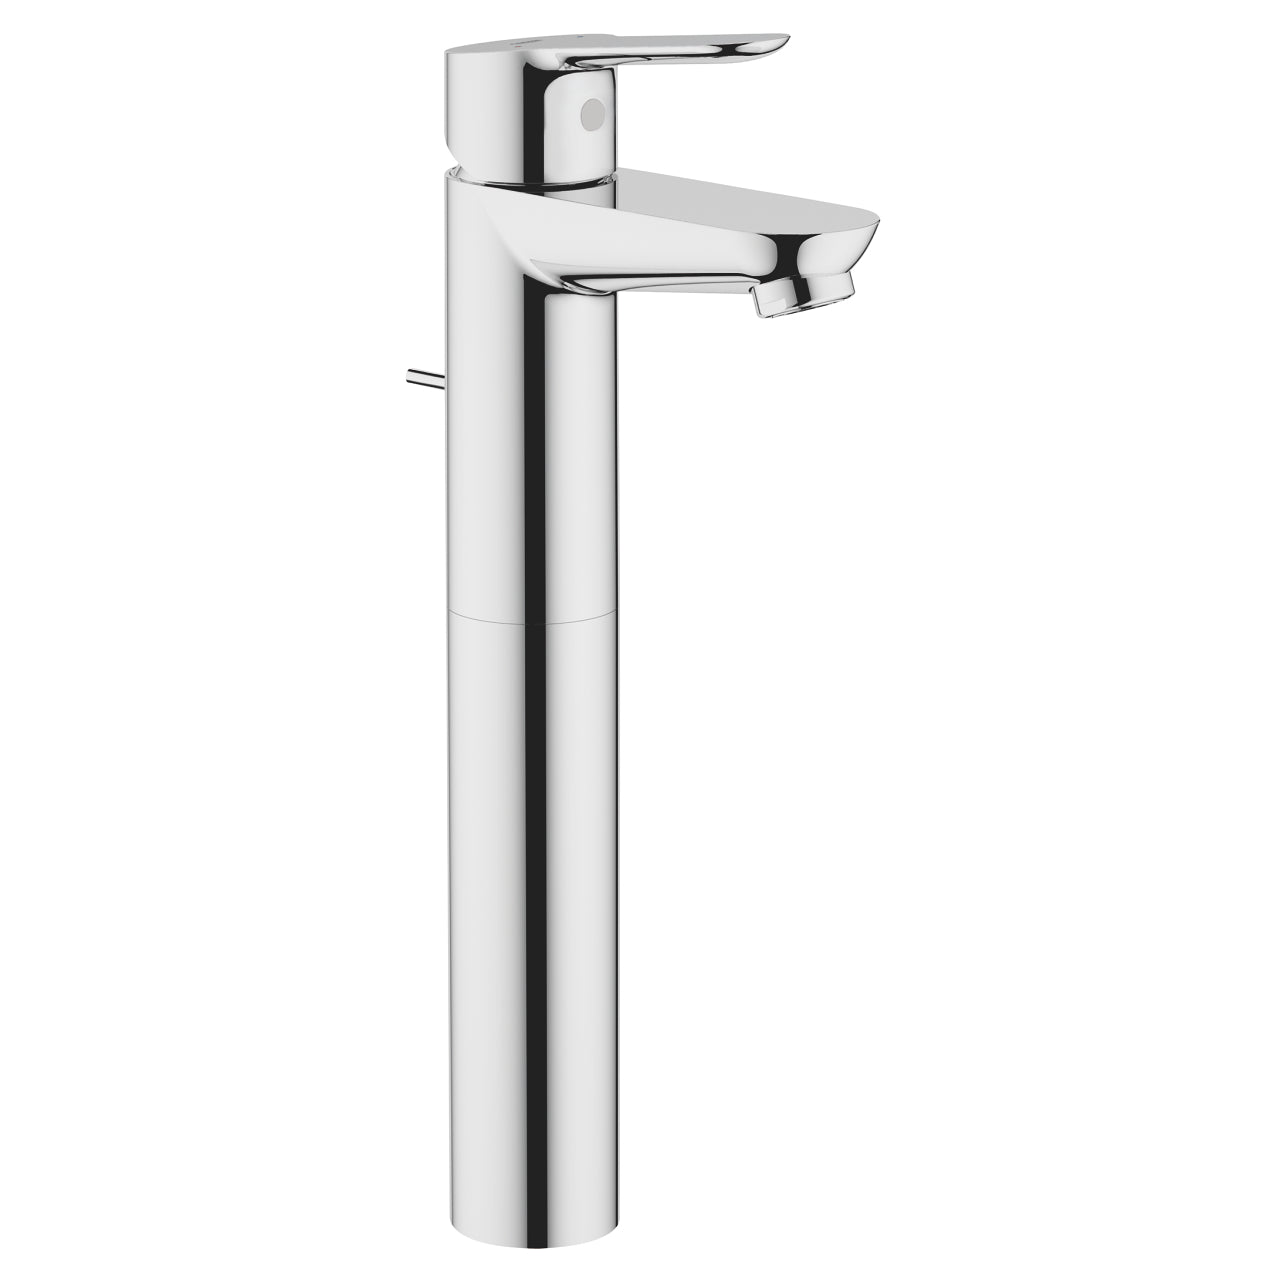 Grohe Bauedge Single Lever Basin Mixer 1 / 2 Inch Xl Size